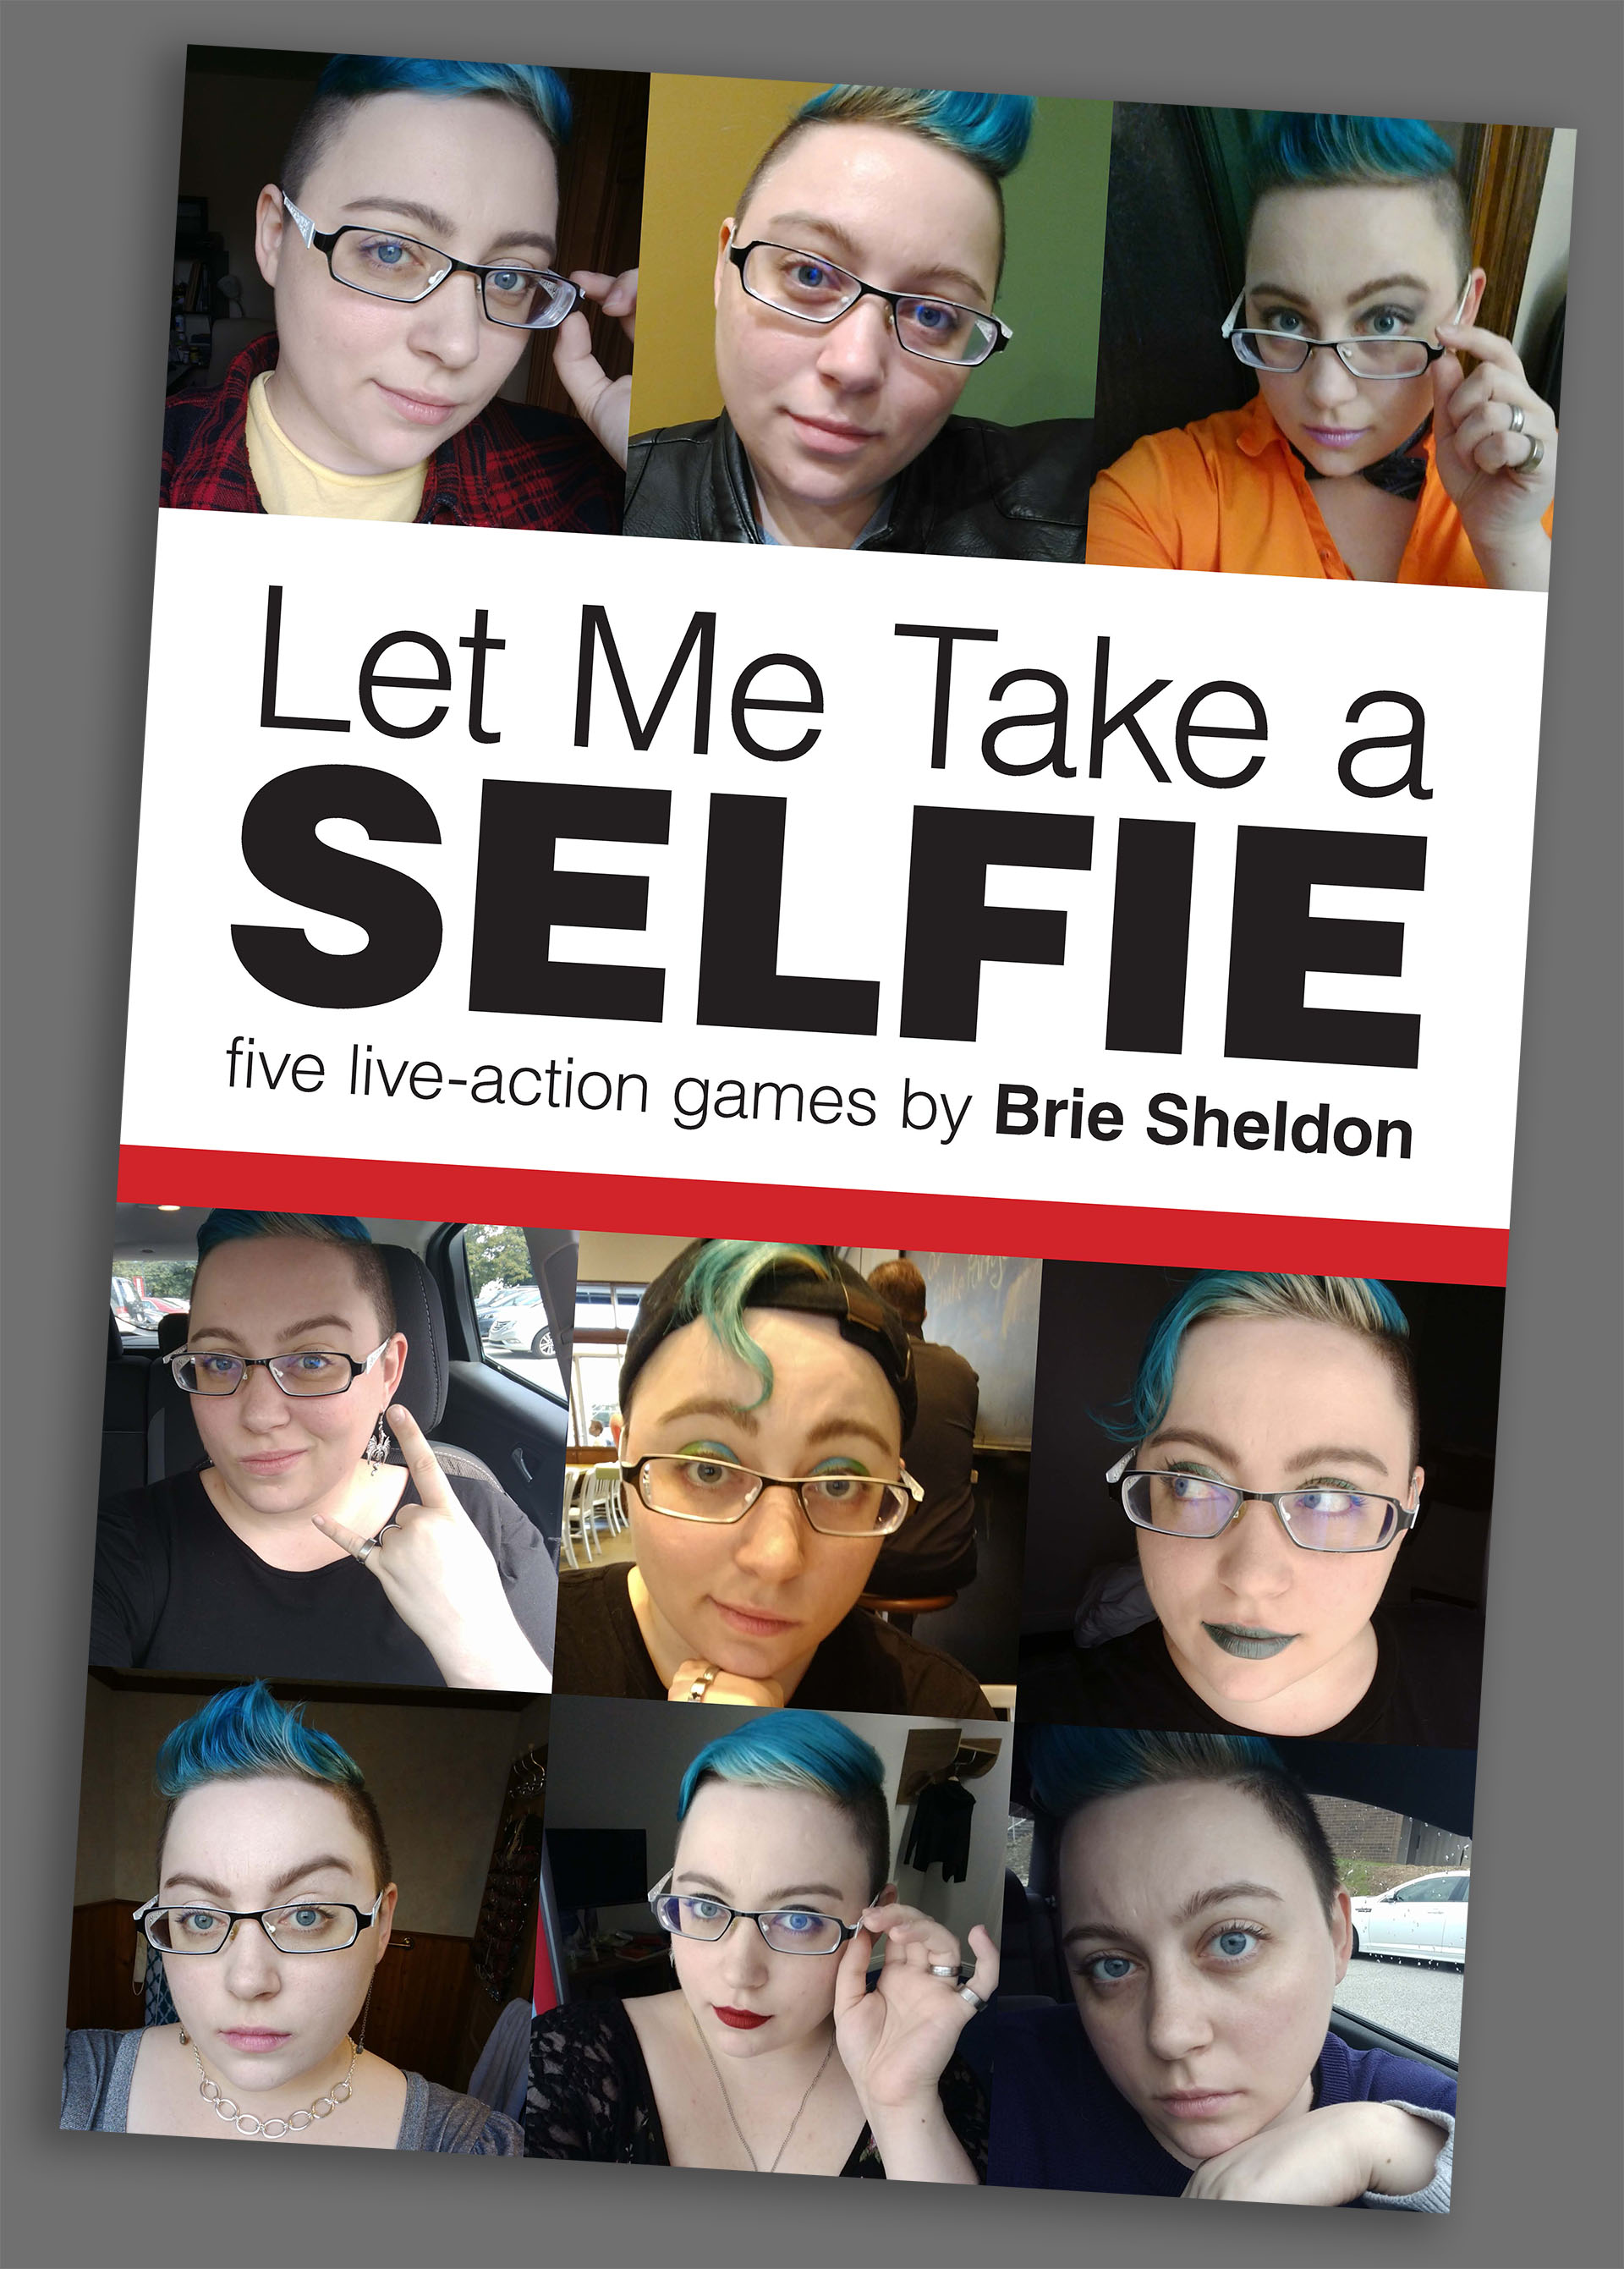 The cover of Let Me Take a selfie, on a gray background